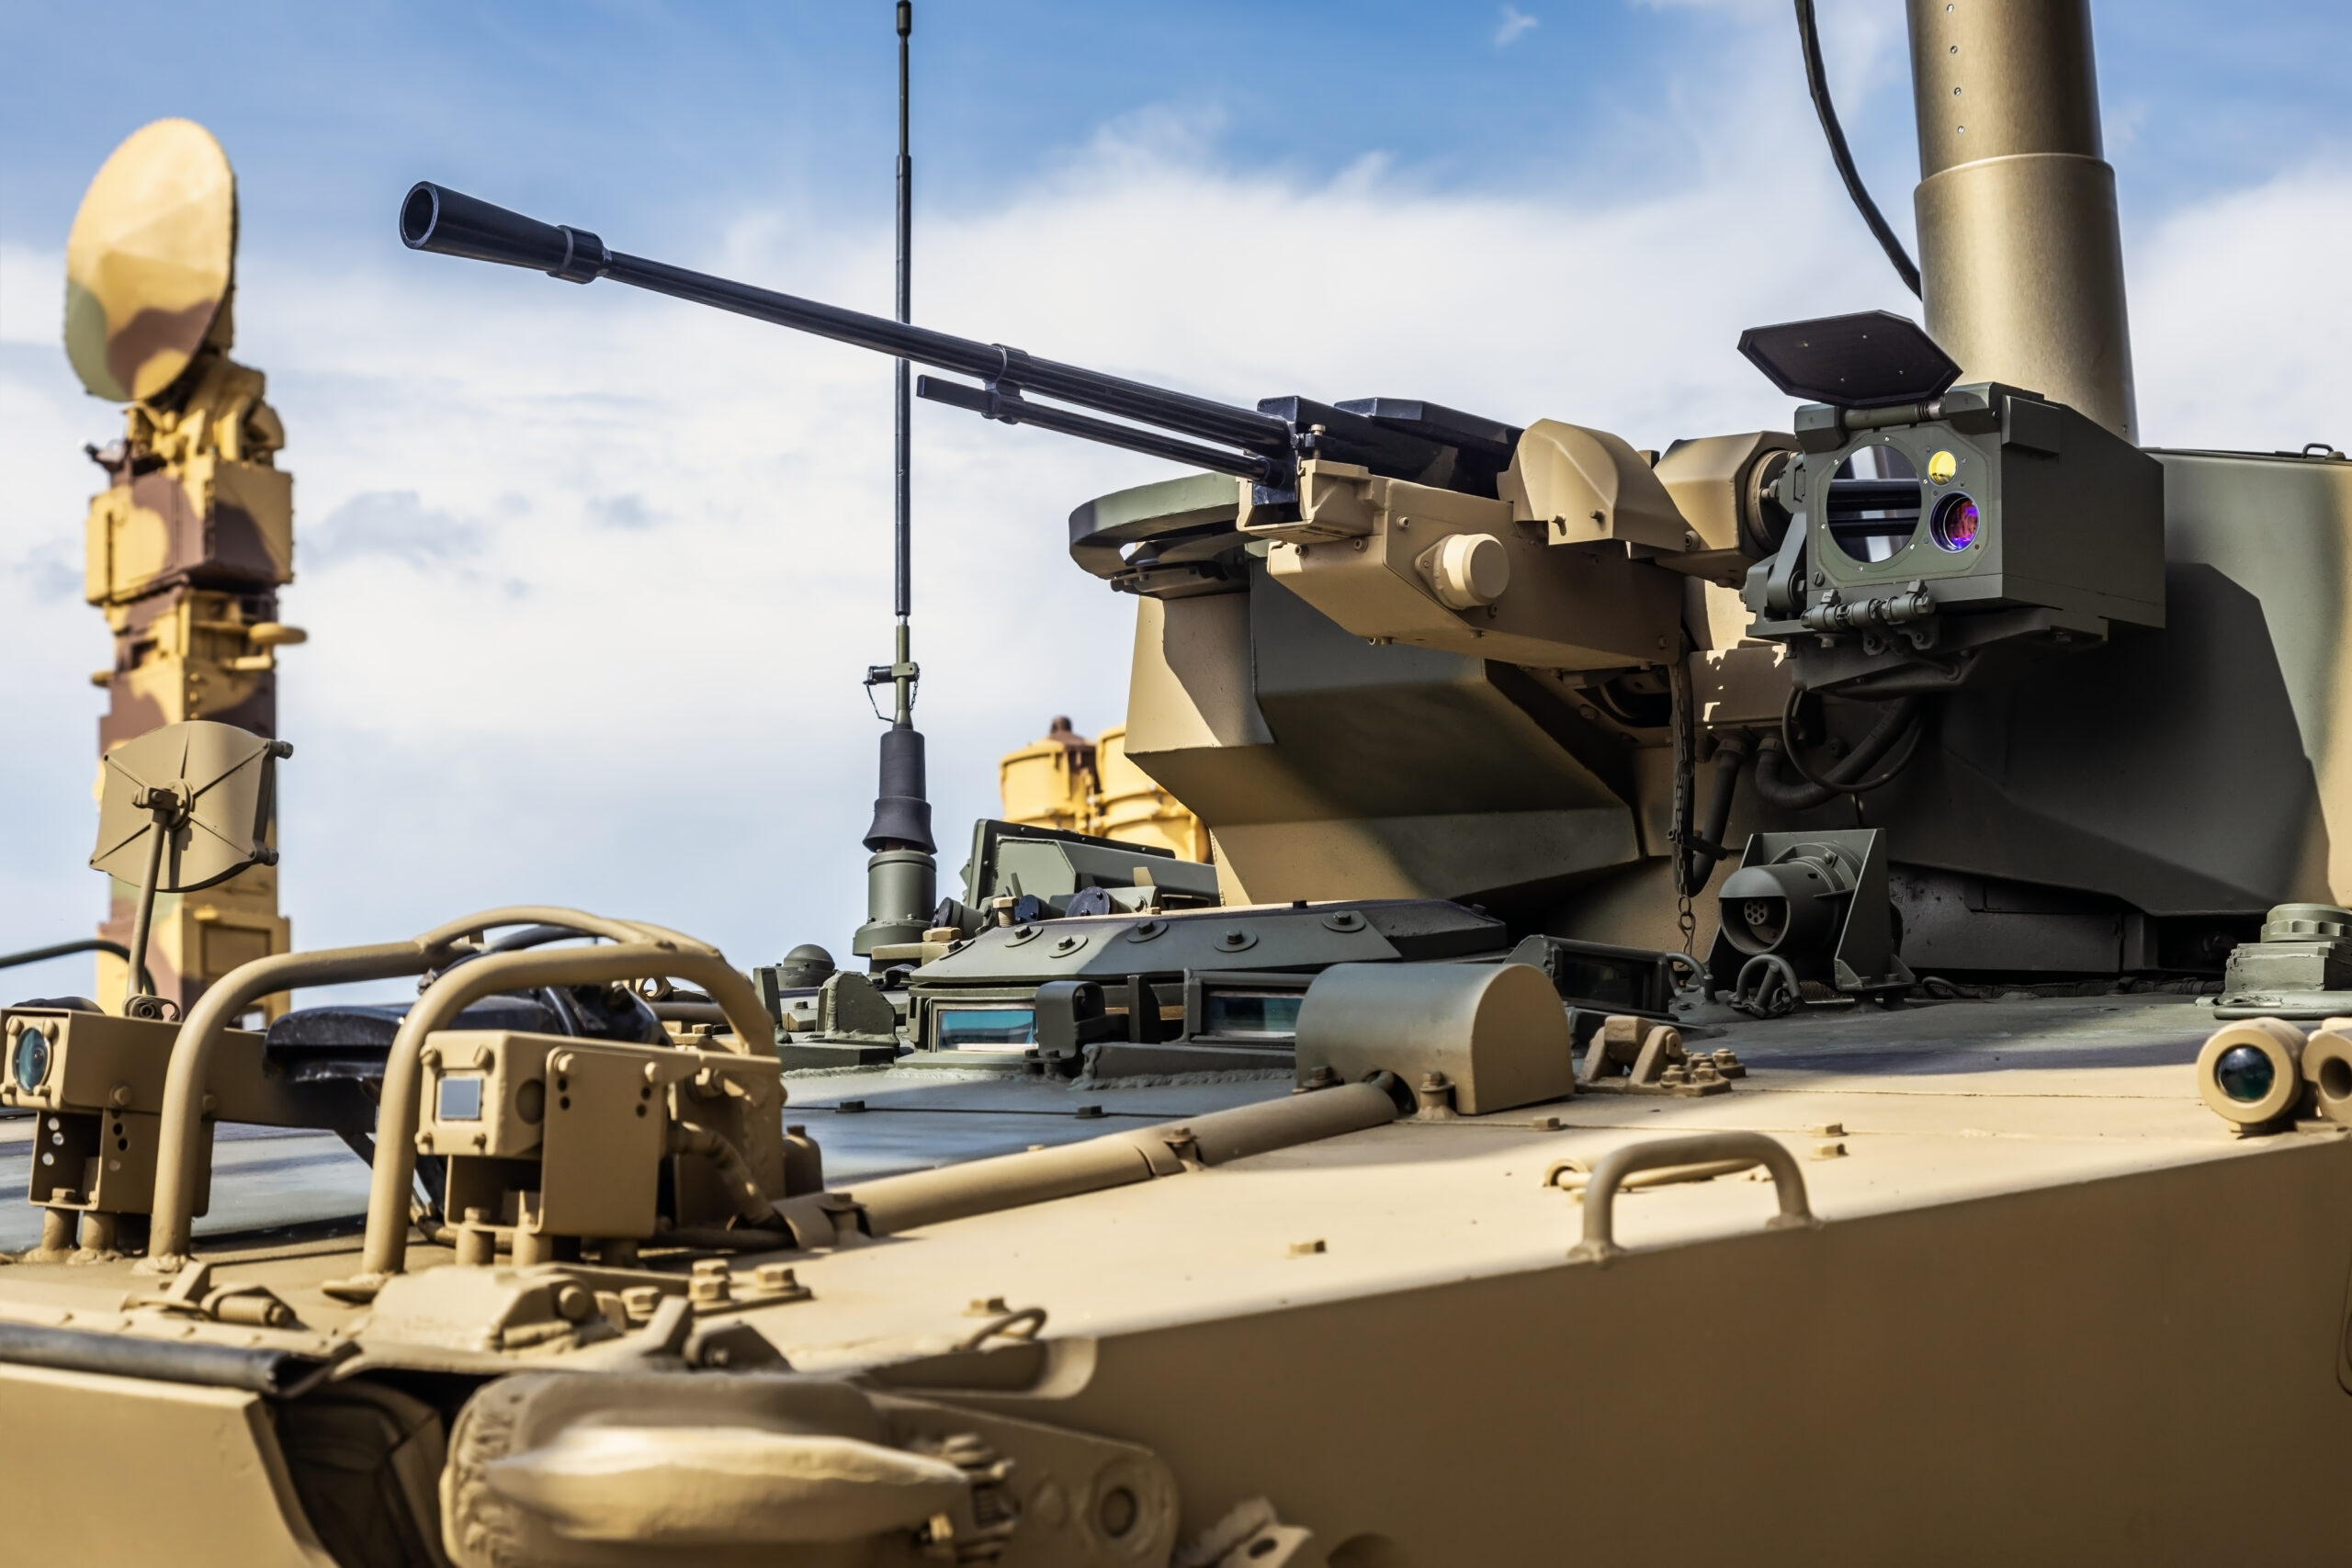 the tower of an infantry fighting vehicle with weapons